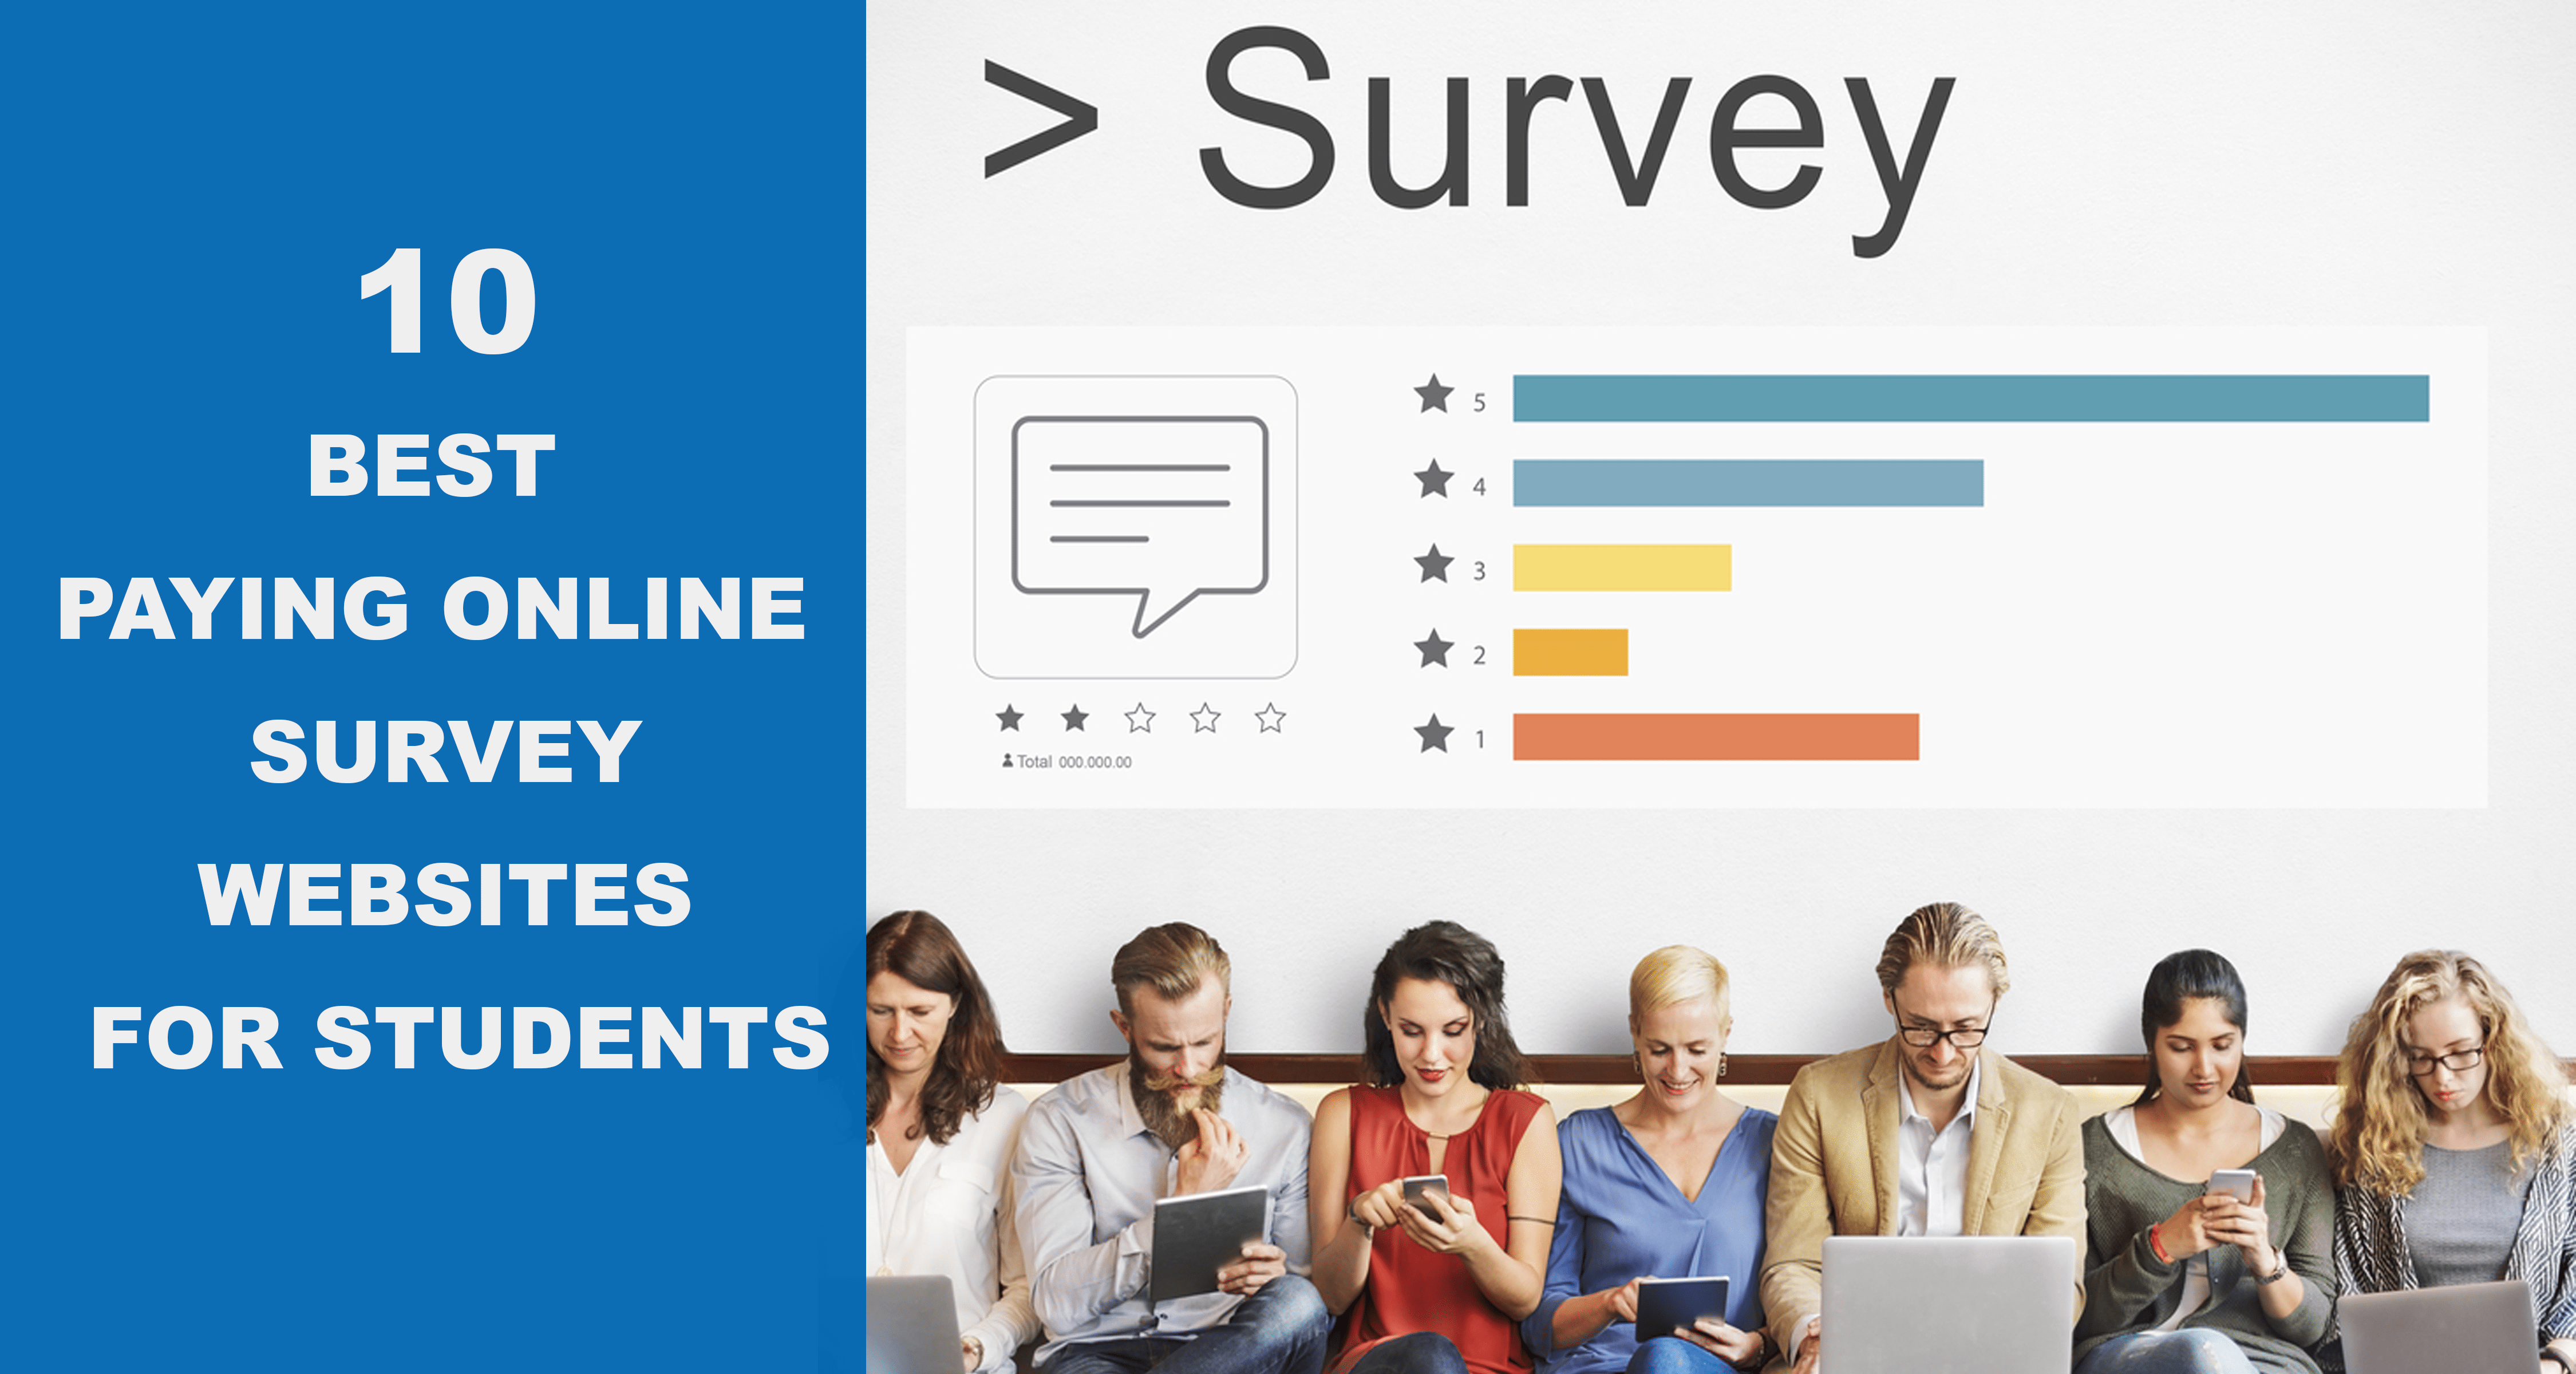 10 Best Paying Online Survey Websites For Students